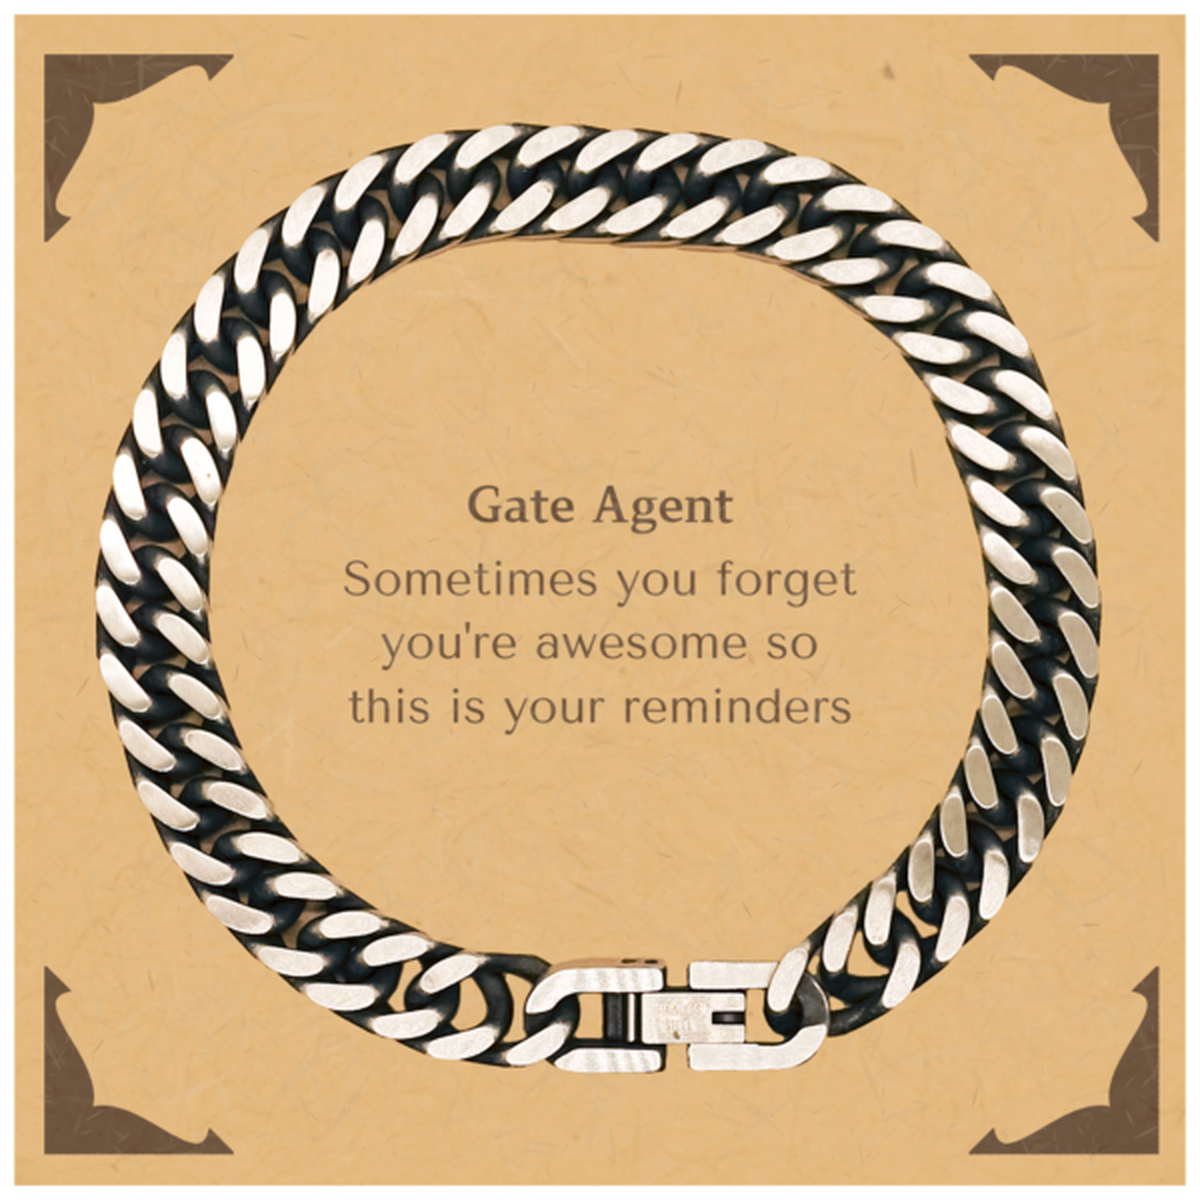 Sentimental Gate Agent Cuban Link Chain Bracelet, Gate Agent Sometimes you forget you're awesome so this is your reminders, Graduation Christmas Birthday Gifts for Gate Agent, Men, Women, Coworkers